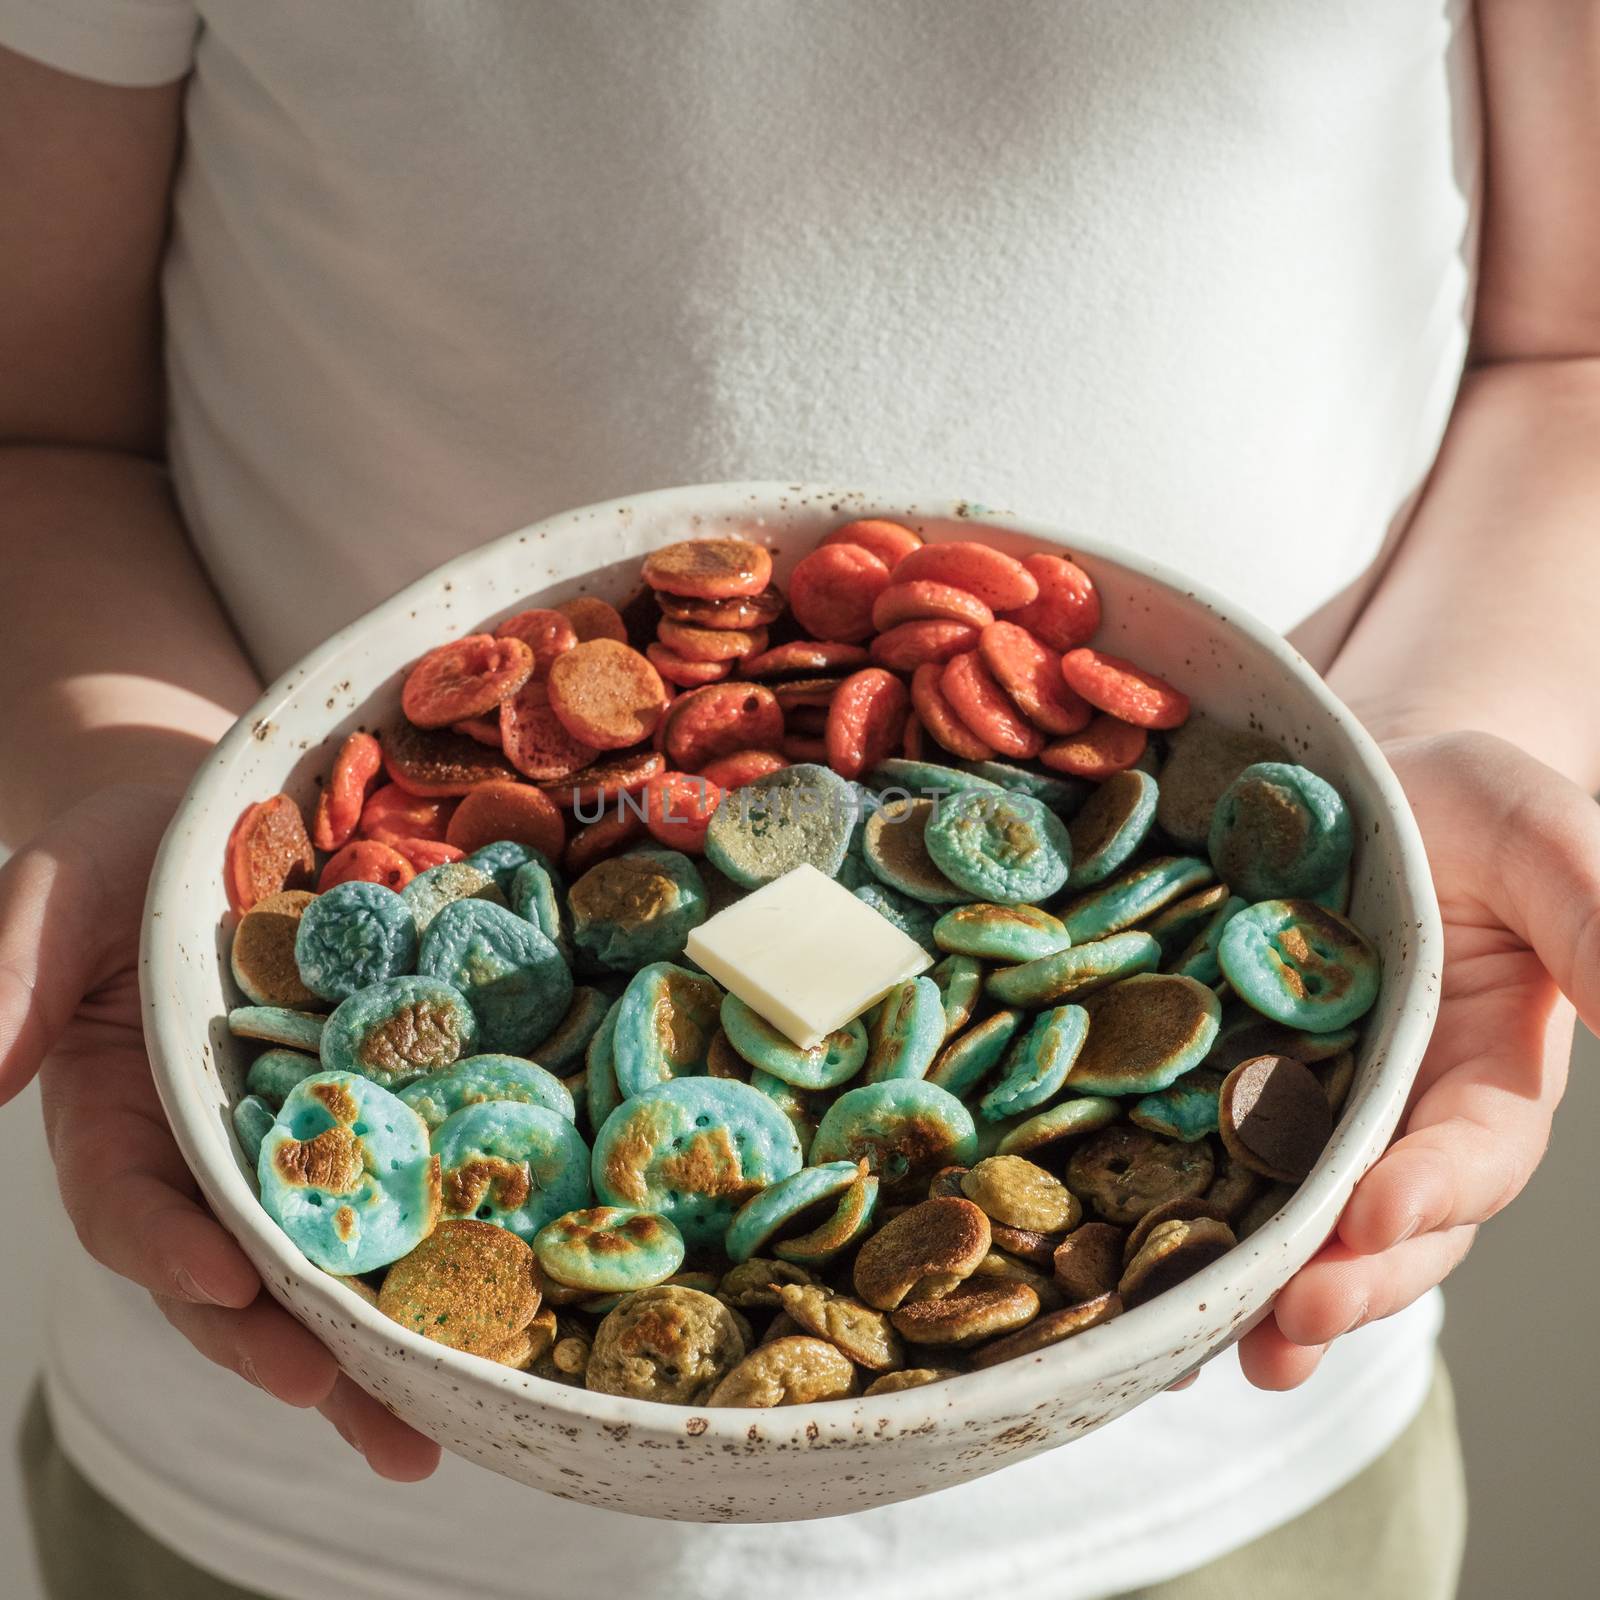 Trendy food - pancake cereal. Colorful mini cereal pancakes in bowl in kids hands. Child hold tiny pancakes with natural colorant - green matcha, turquose spirulina, blue pea, red dragon fruit